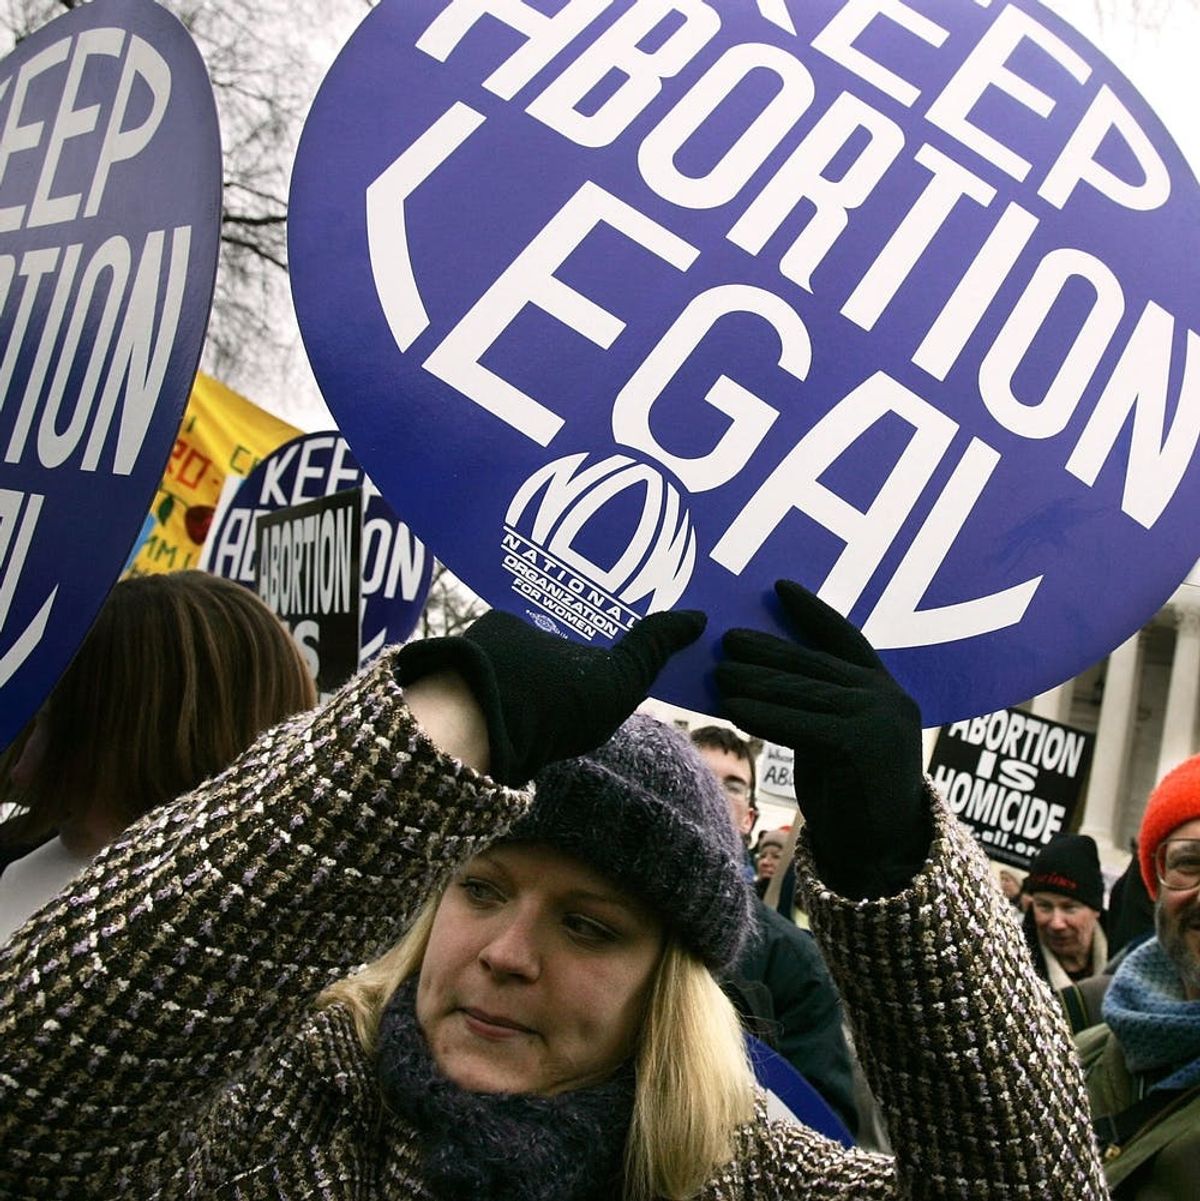 Why Many Women Are Livid About Ohio’s “Heartbeat Bill”